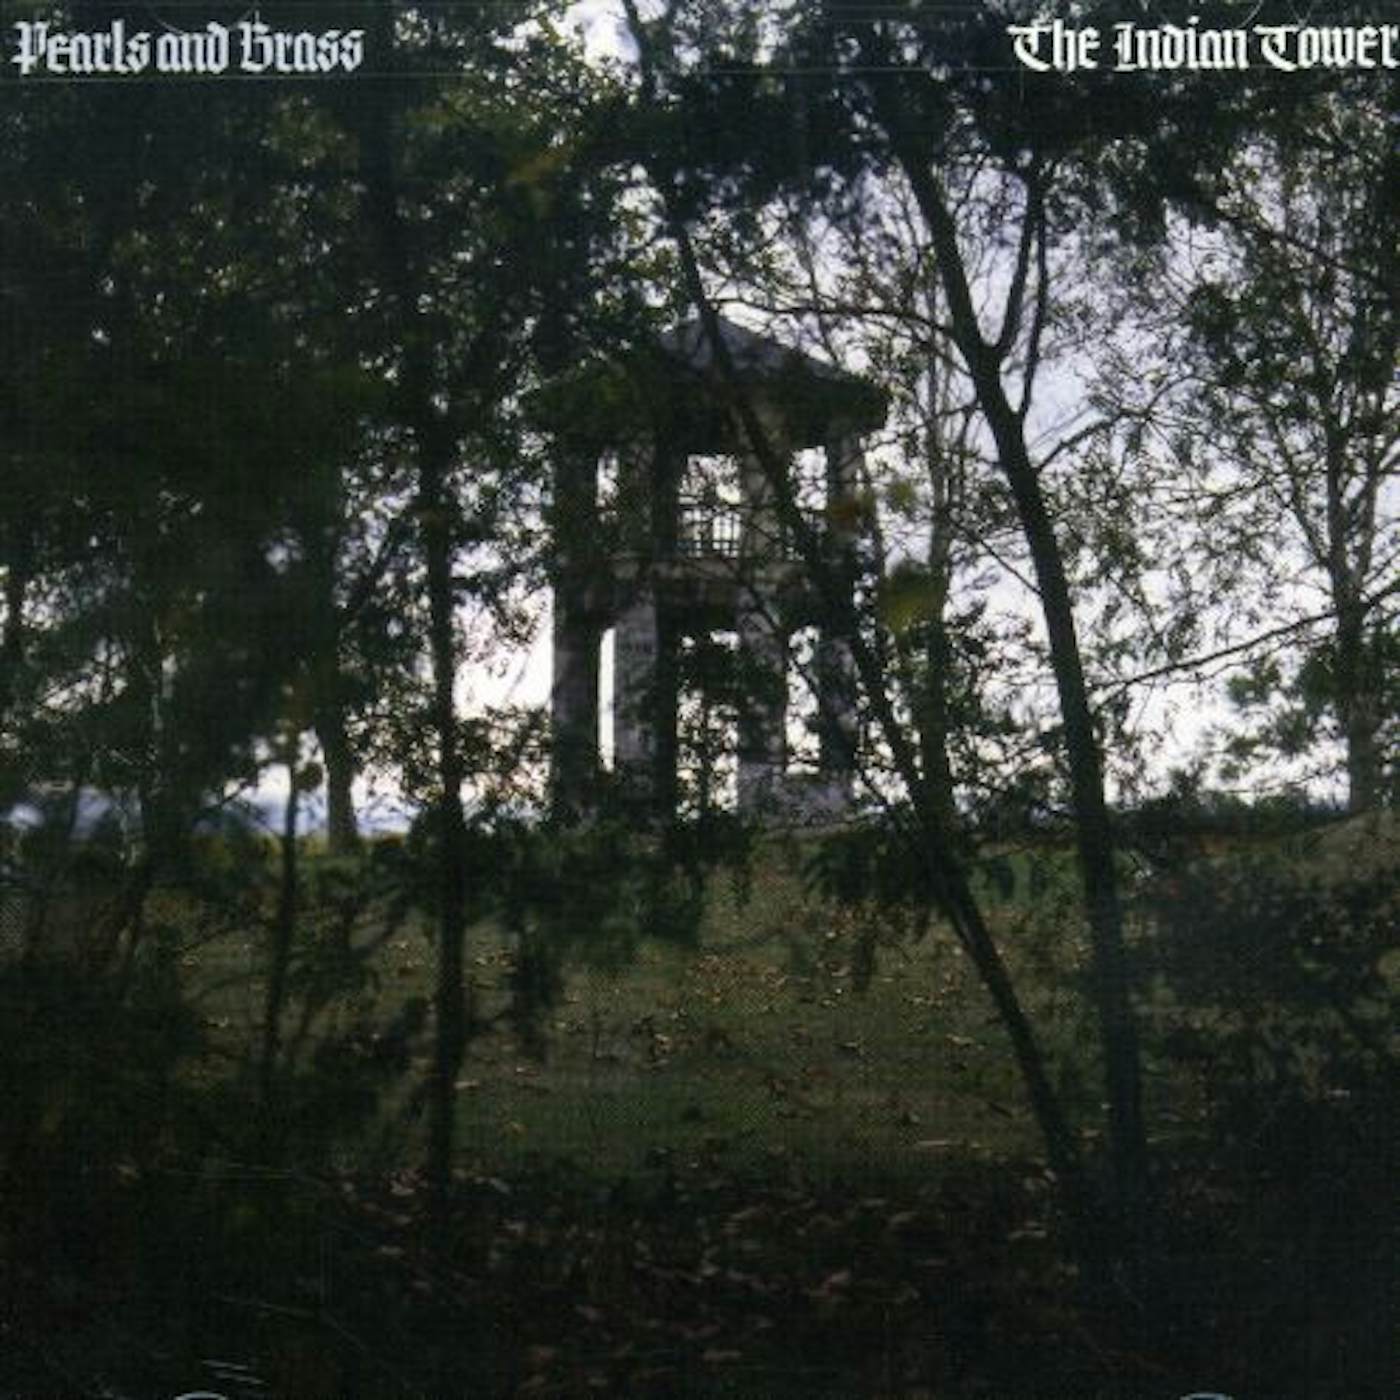 Pearls & Brass INDIAN TOWER CD